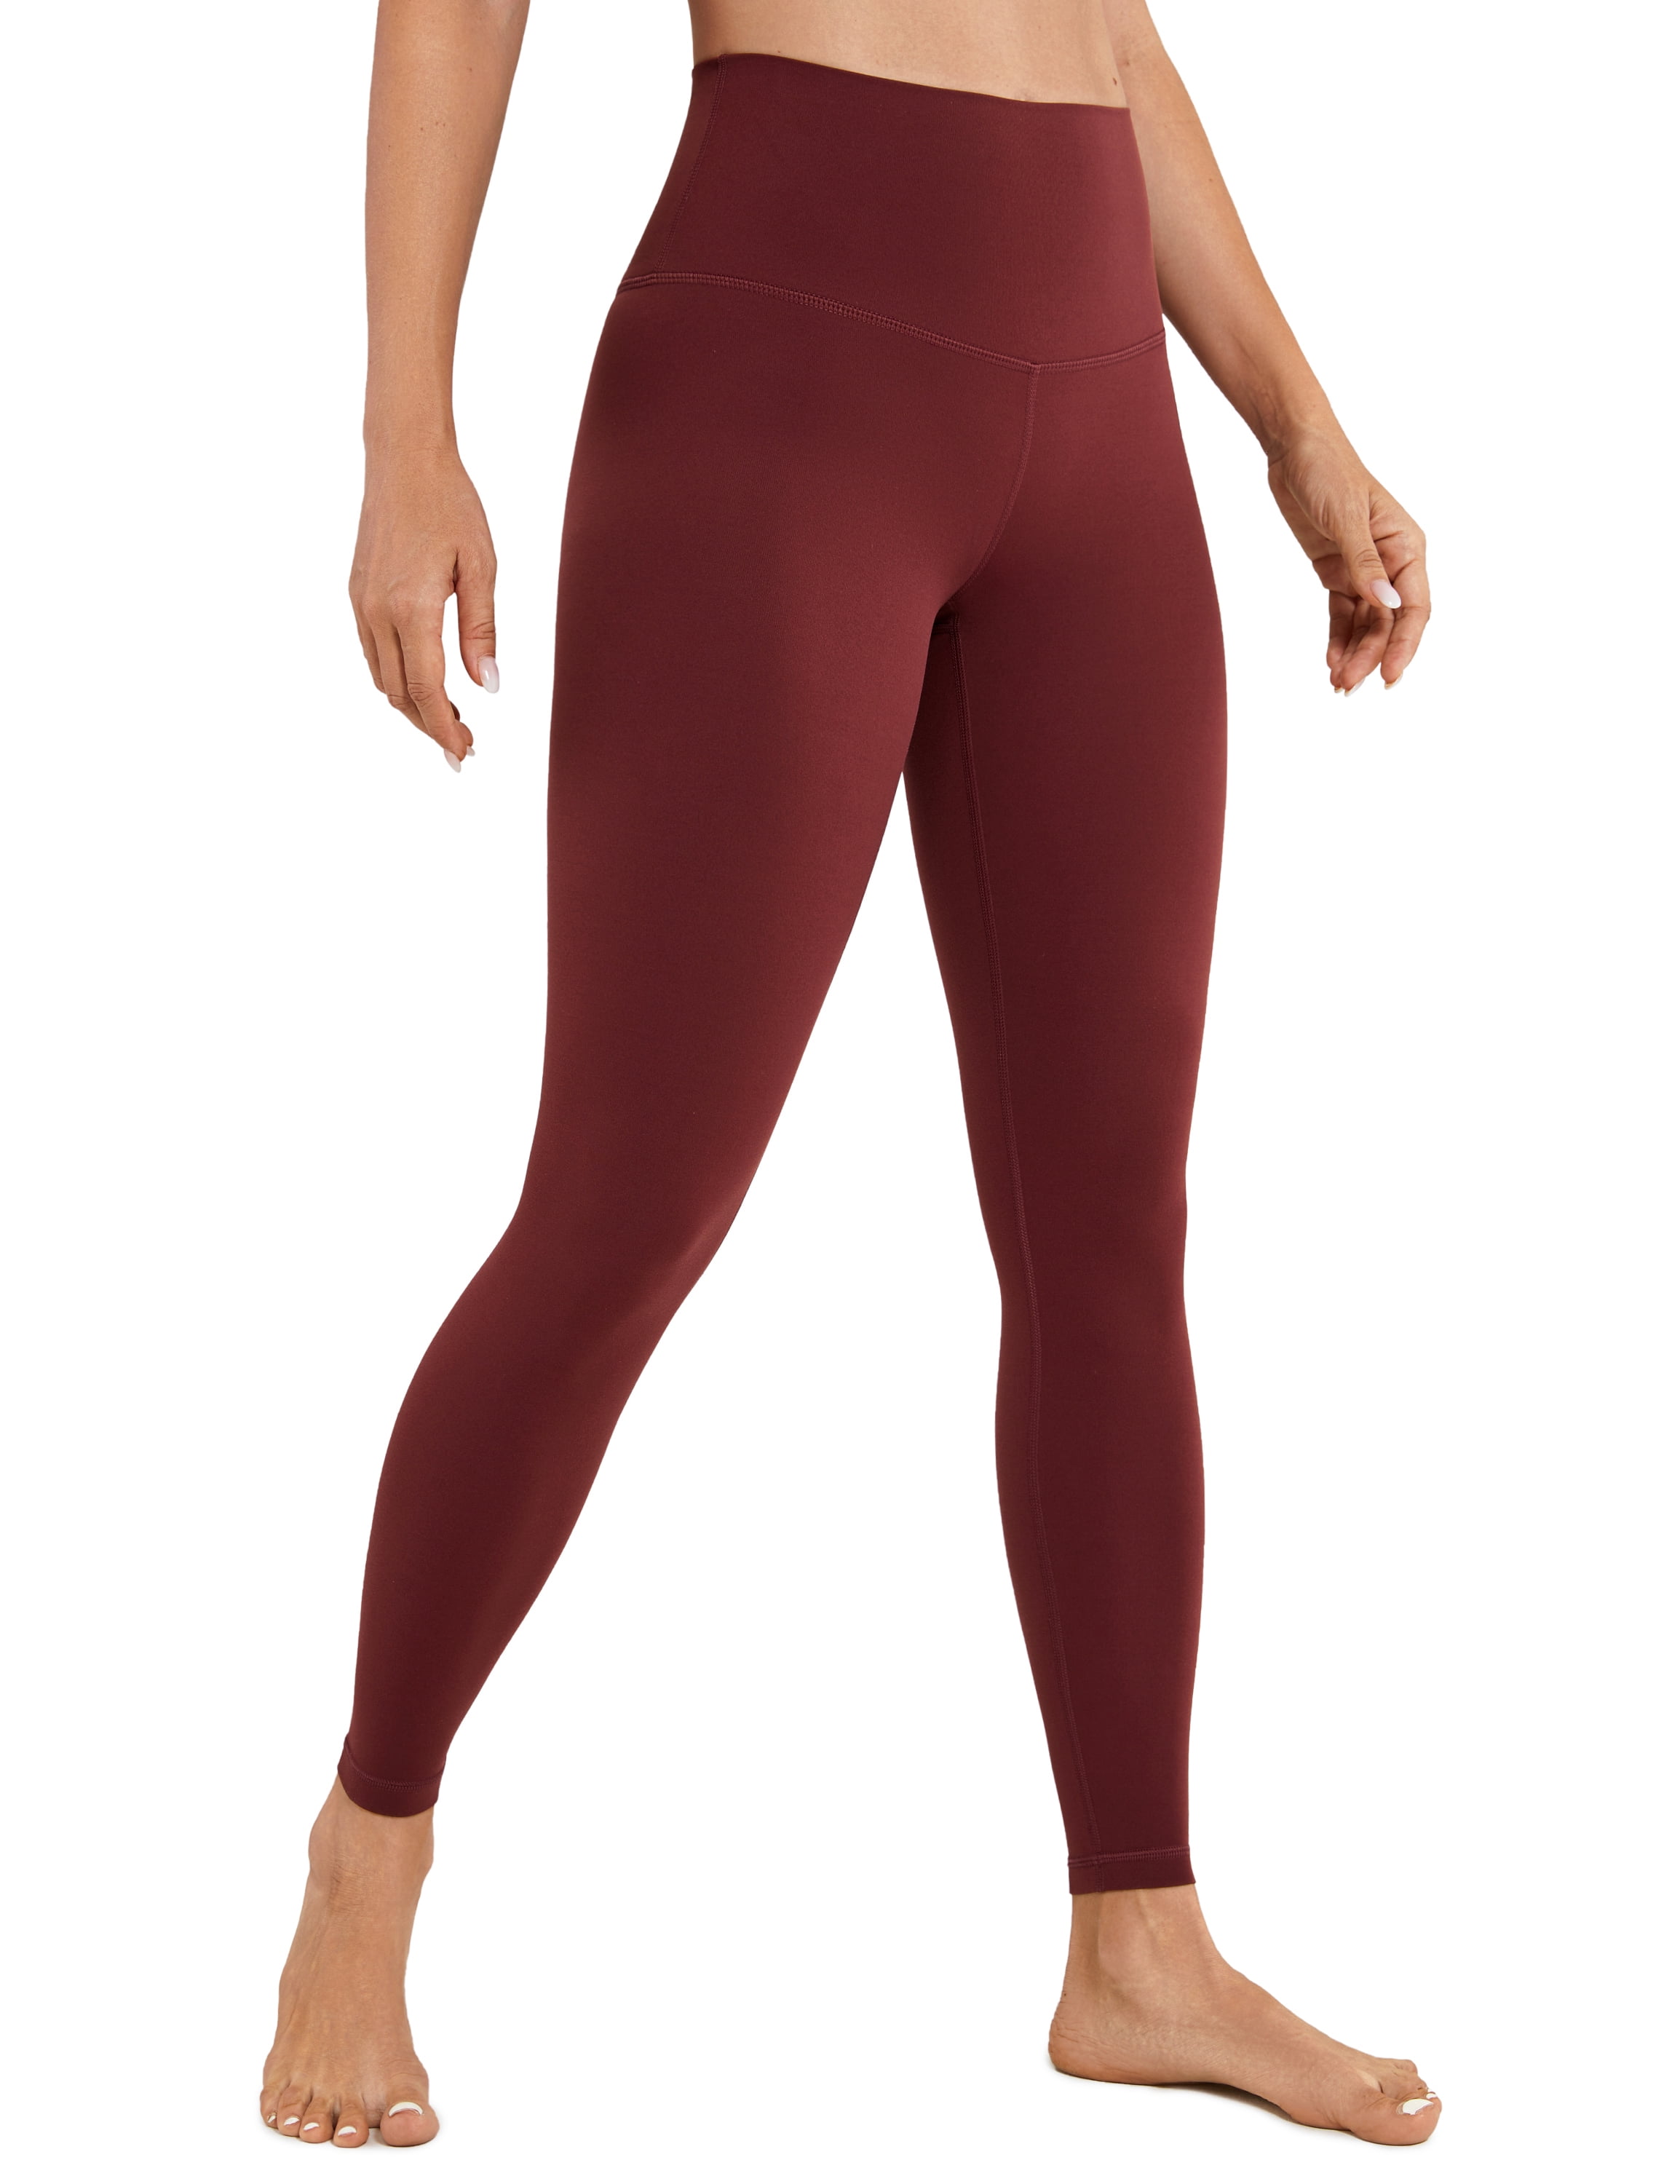 Luxe Chic] Flamin Hot Yoga Leggings – The Hyper Culture